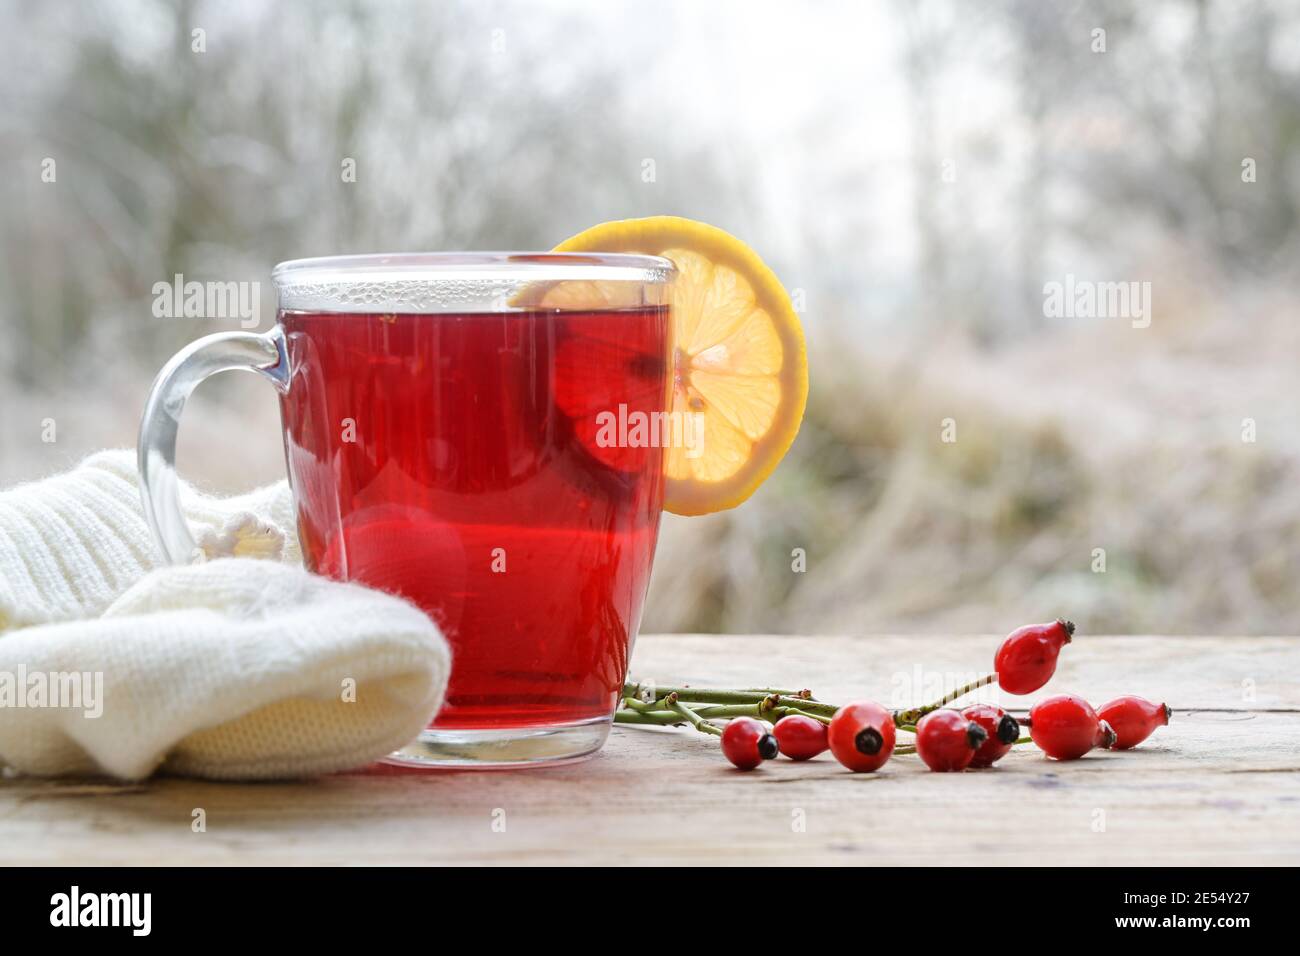 Hot red rose hip tea with a lemon slice in a glass mug on a rustic wooden table against a frosty winter landscape, copy space, selected focus, narrow Stock Photo